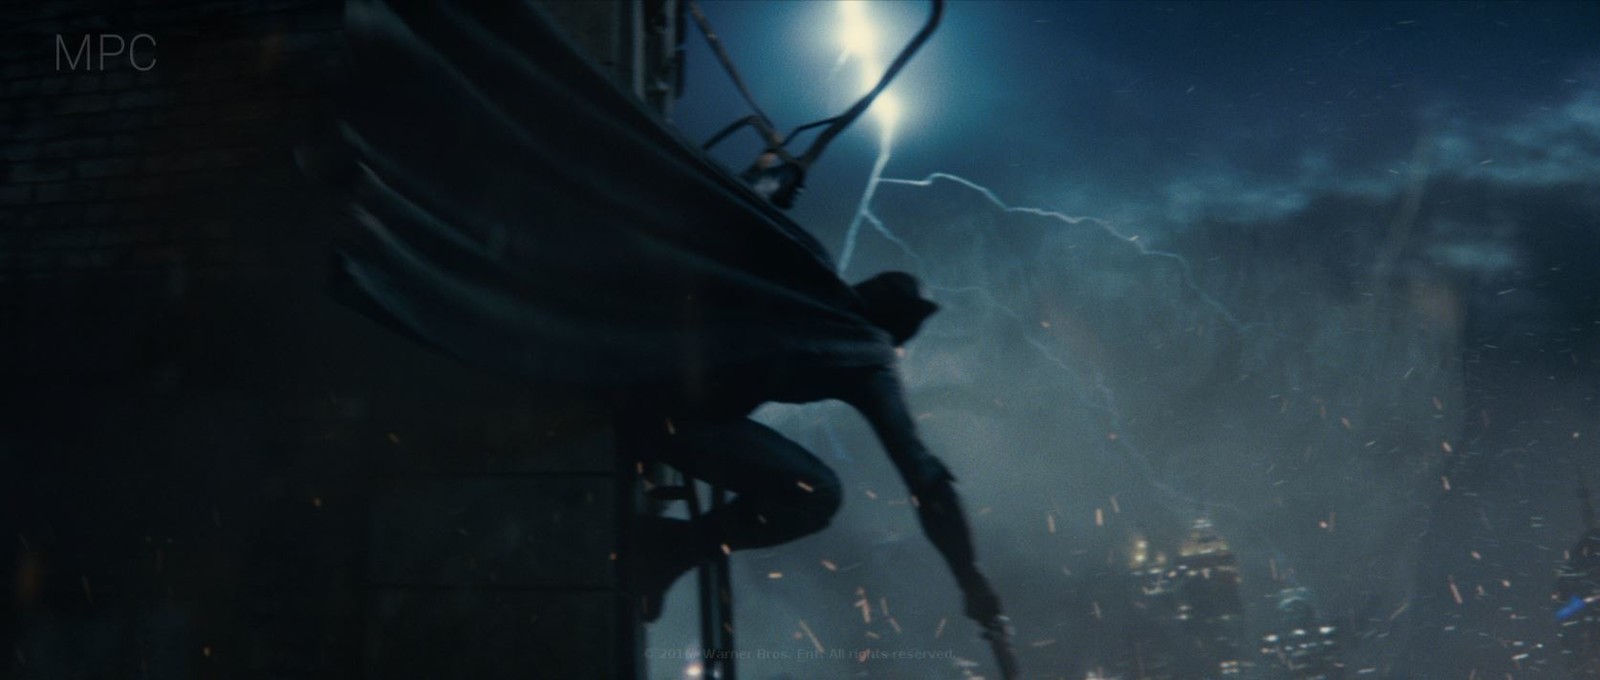 Responsible for lighting the shot (full CG) as well as look development on Batman and the building.